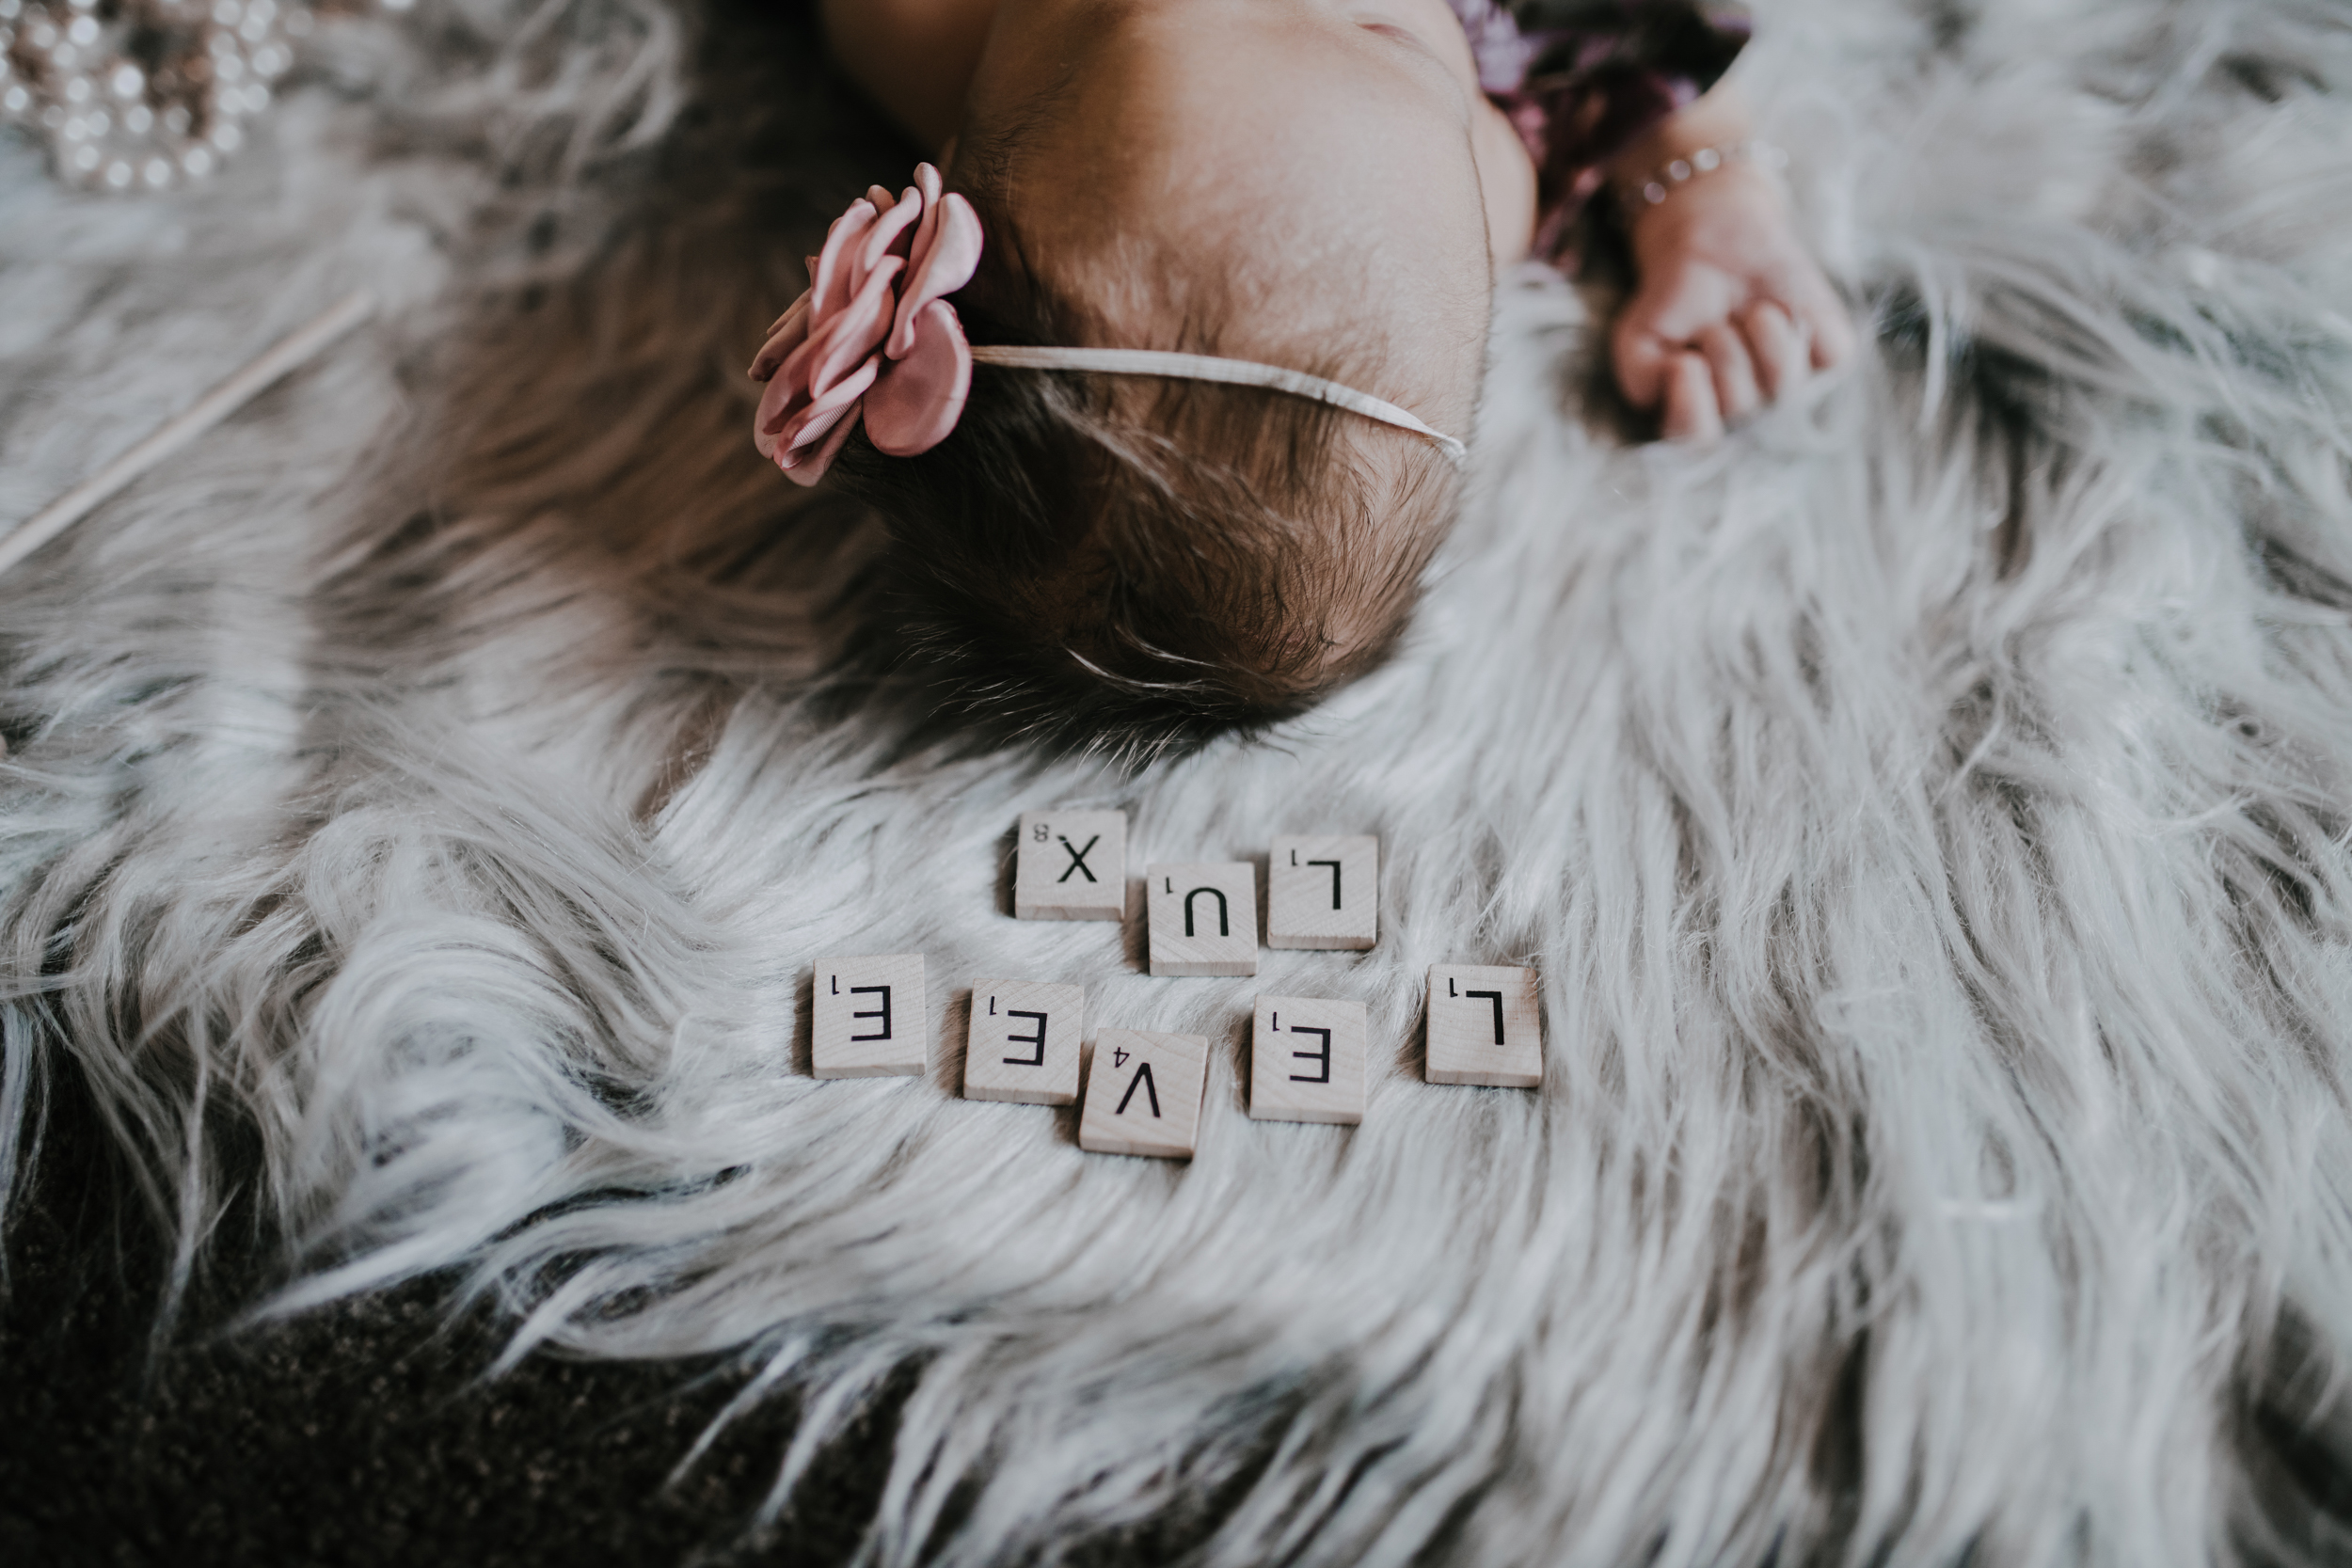 Baby name with scrabble blocks